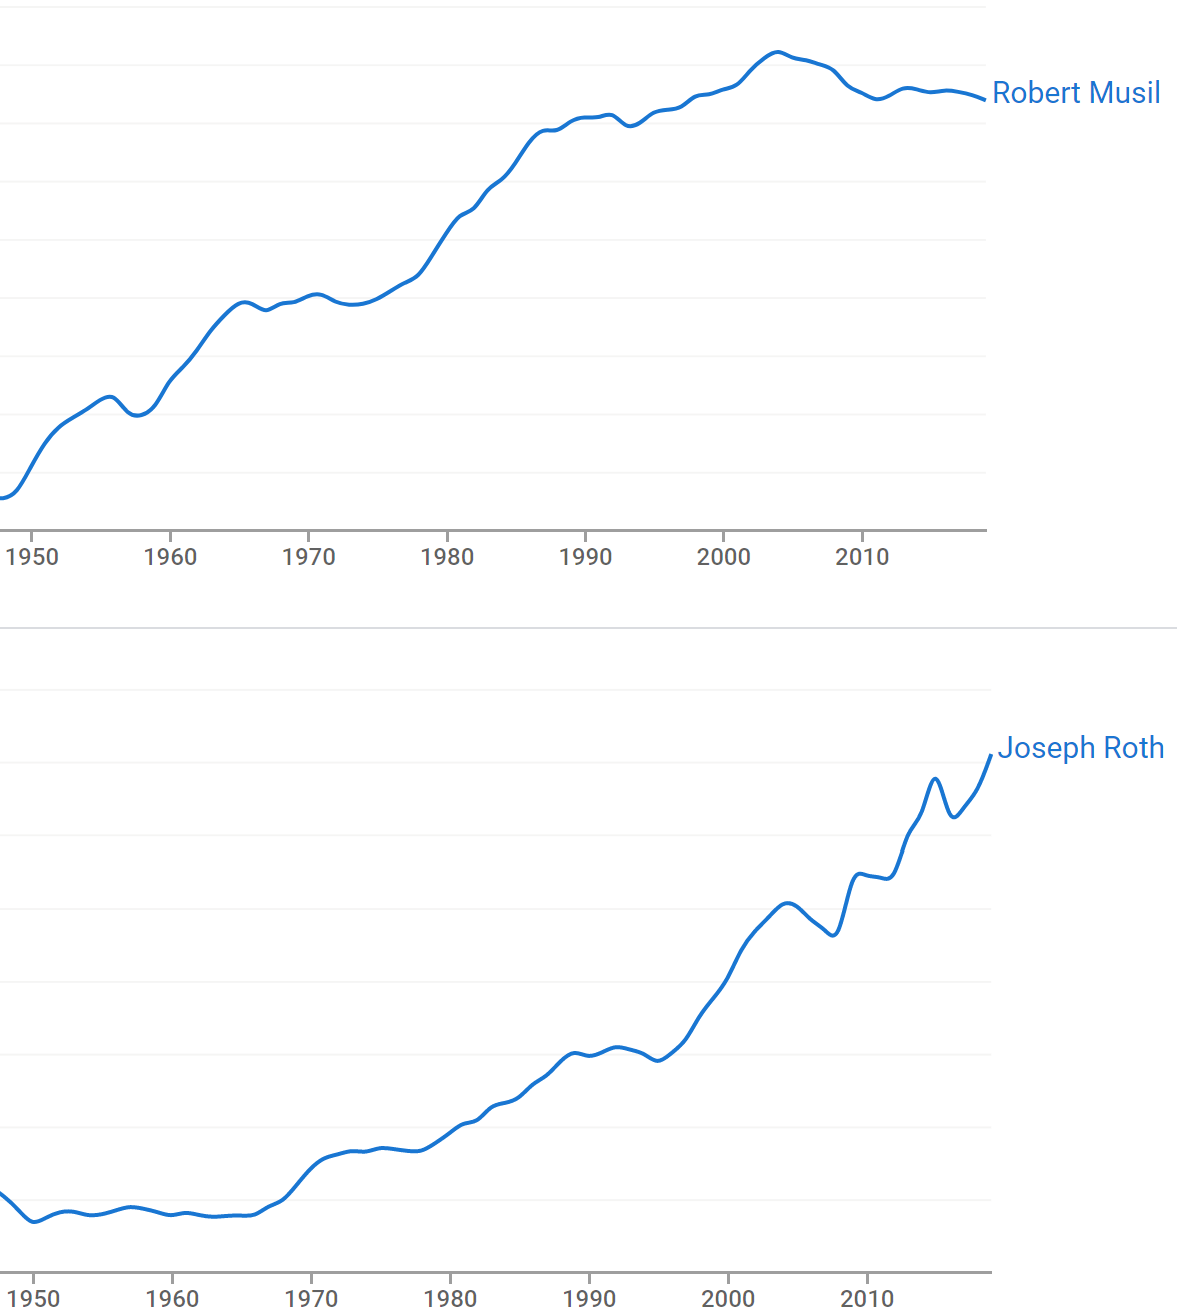 Google ngrams for English mentions of Musil and Roth